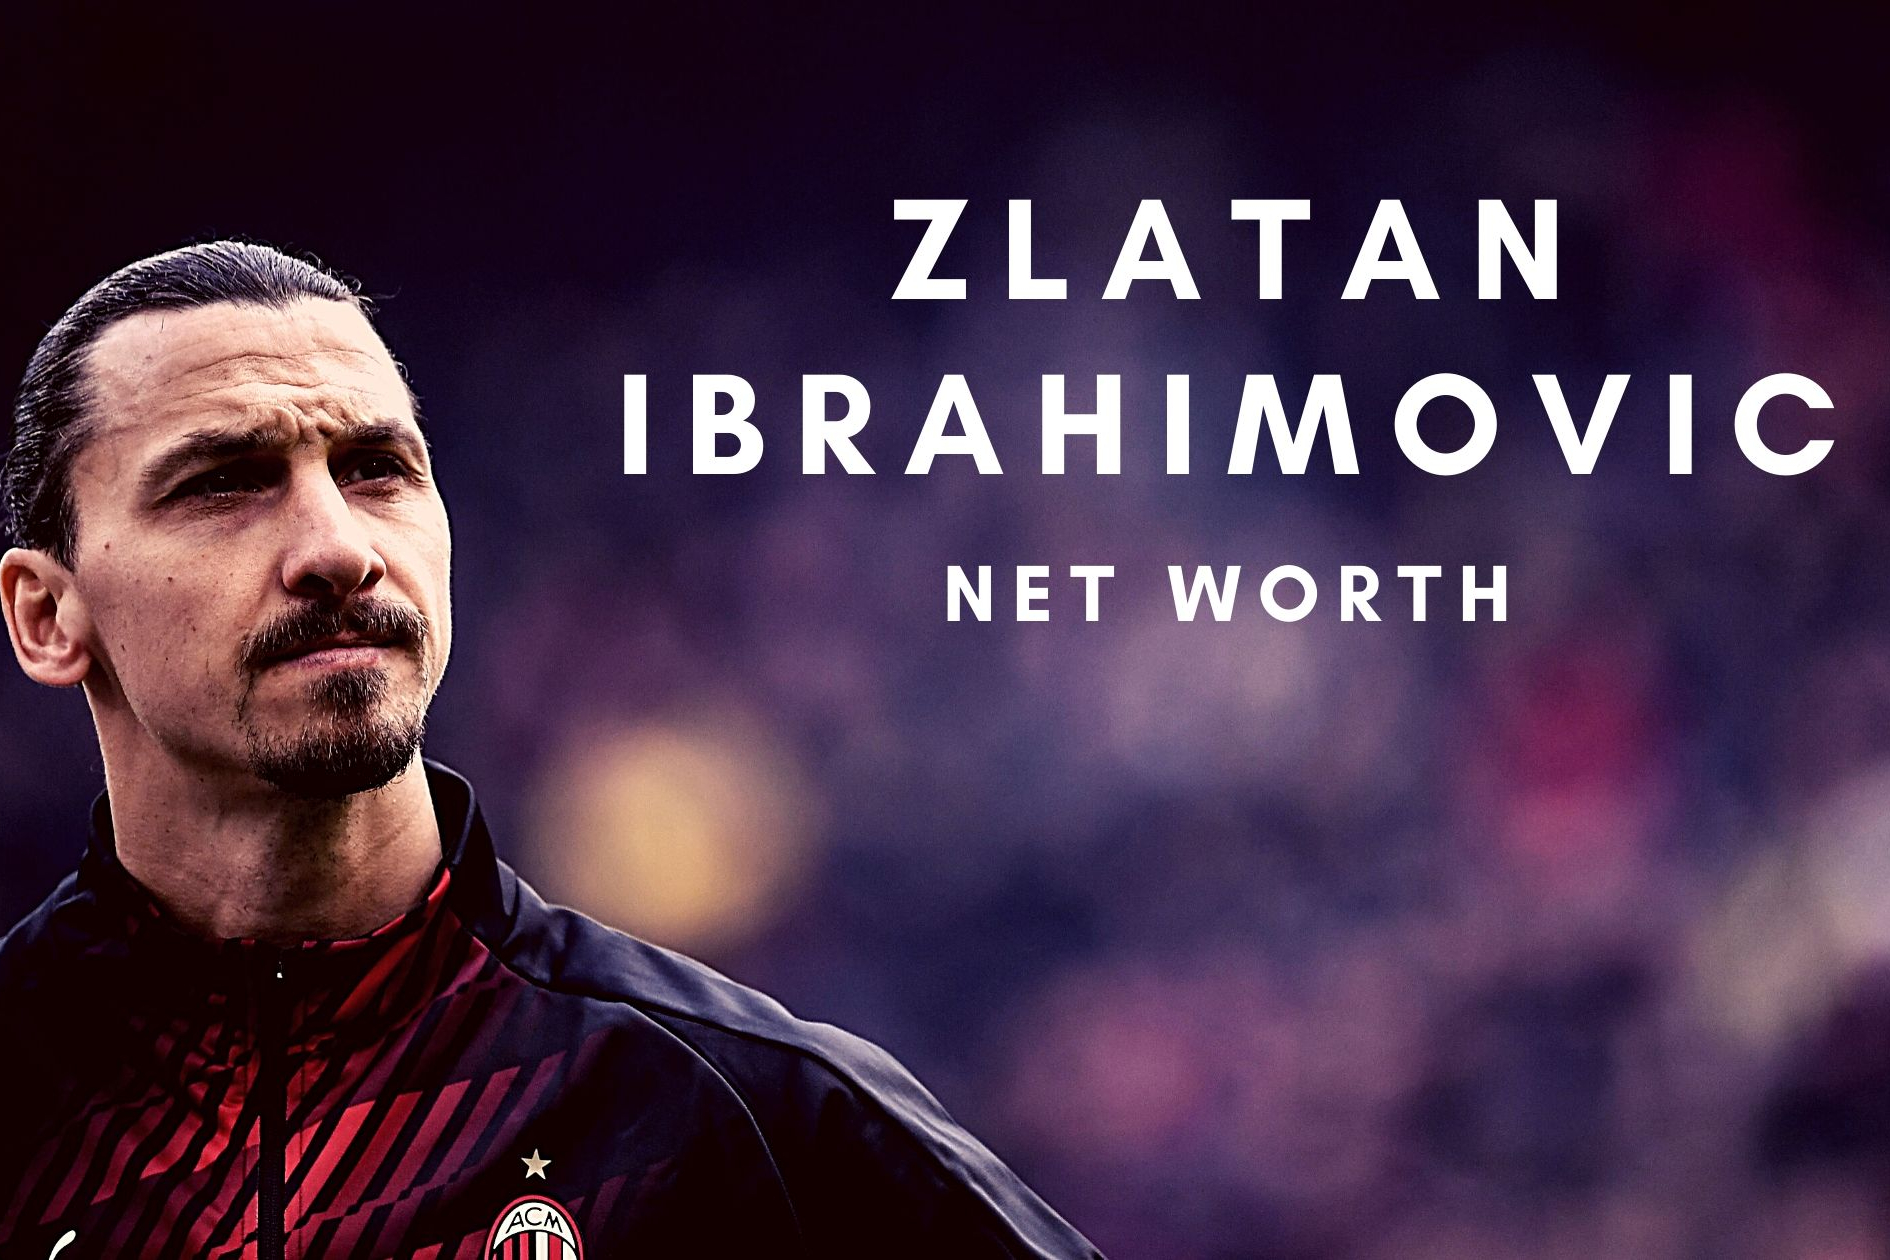 the-strategy-of-earning-one-and-a-half-million-euros-a-year-from-sitting-learn-from-ibra